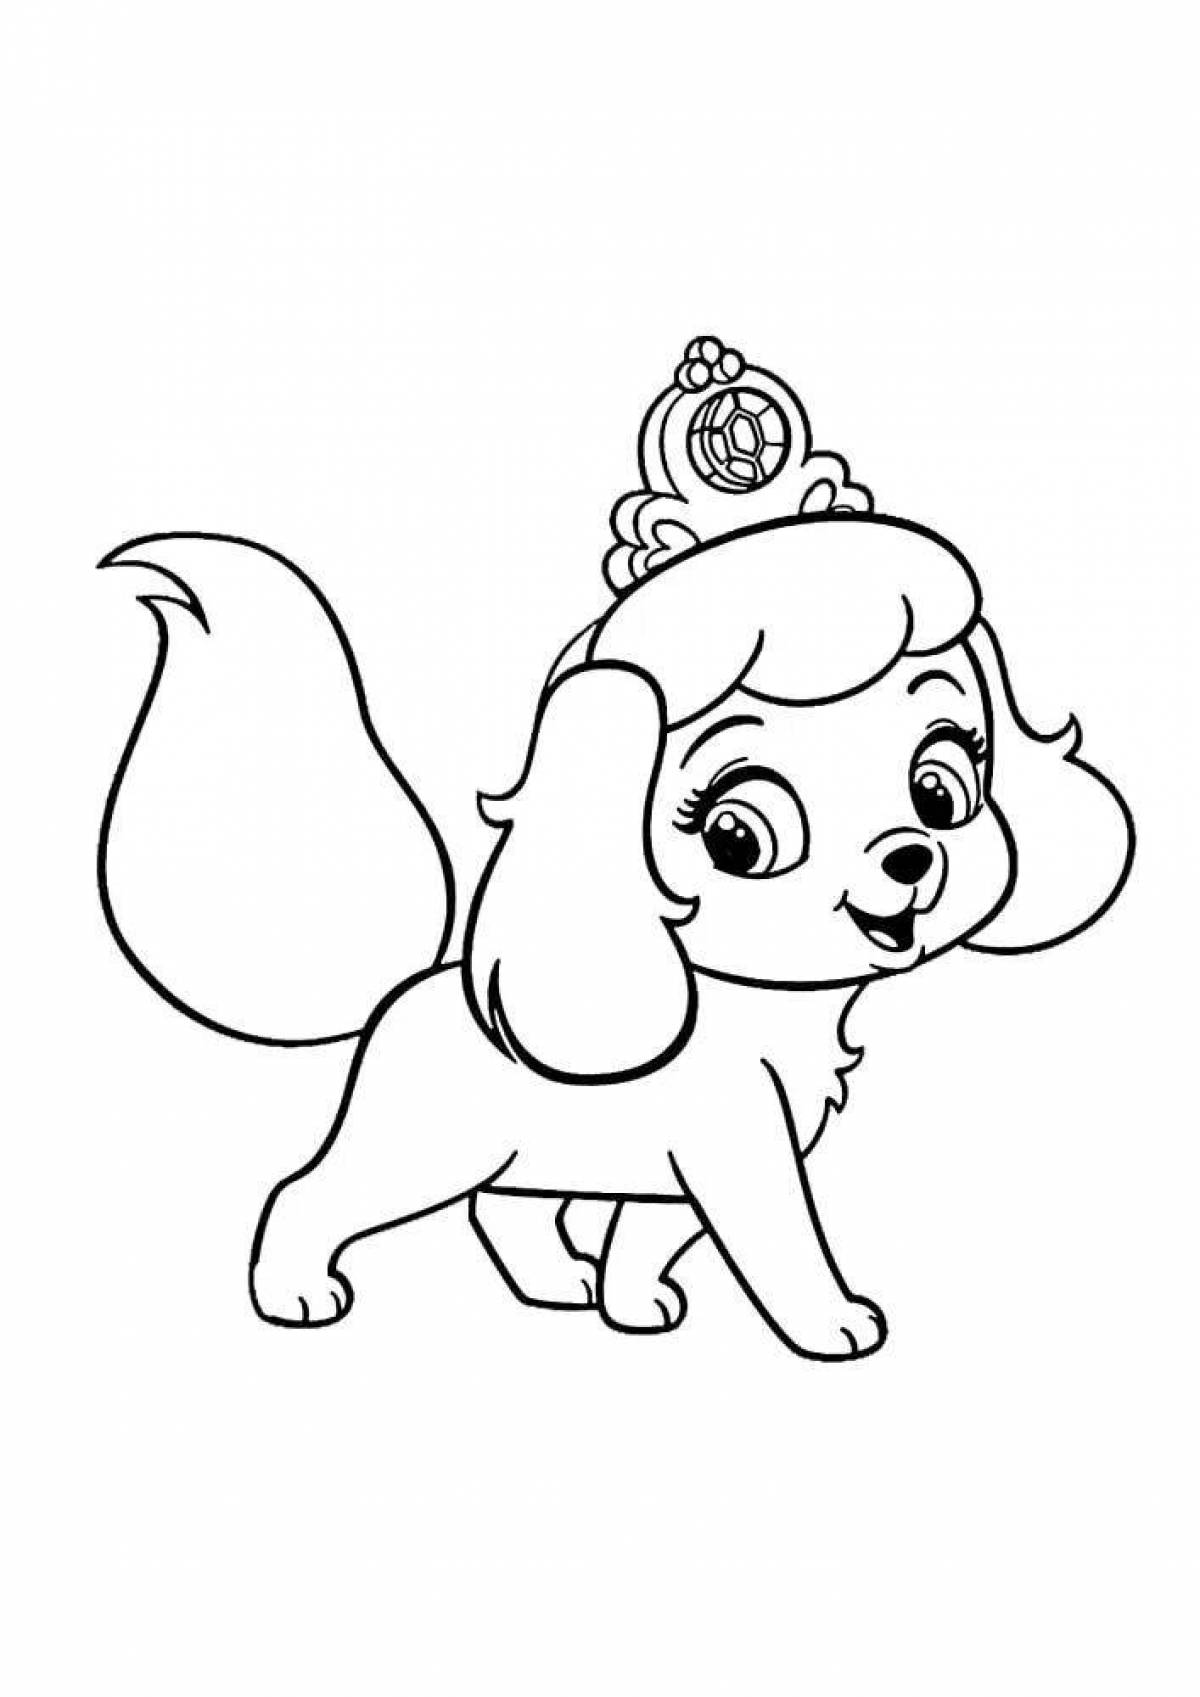 Adorable dog coloring book for girls